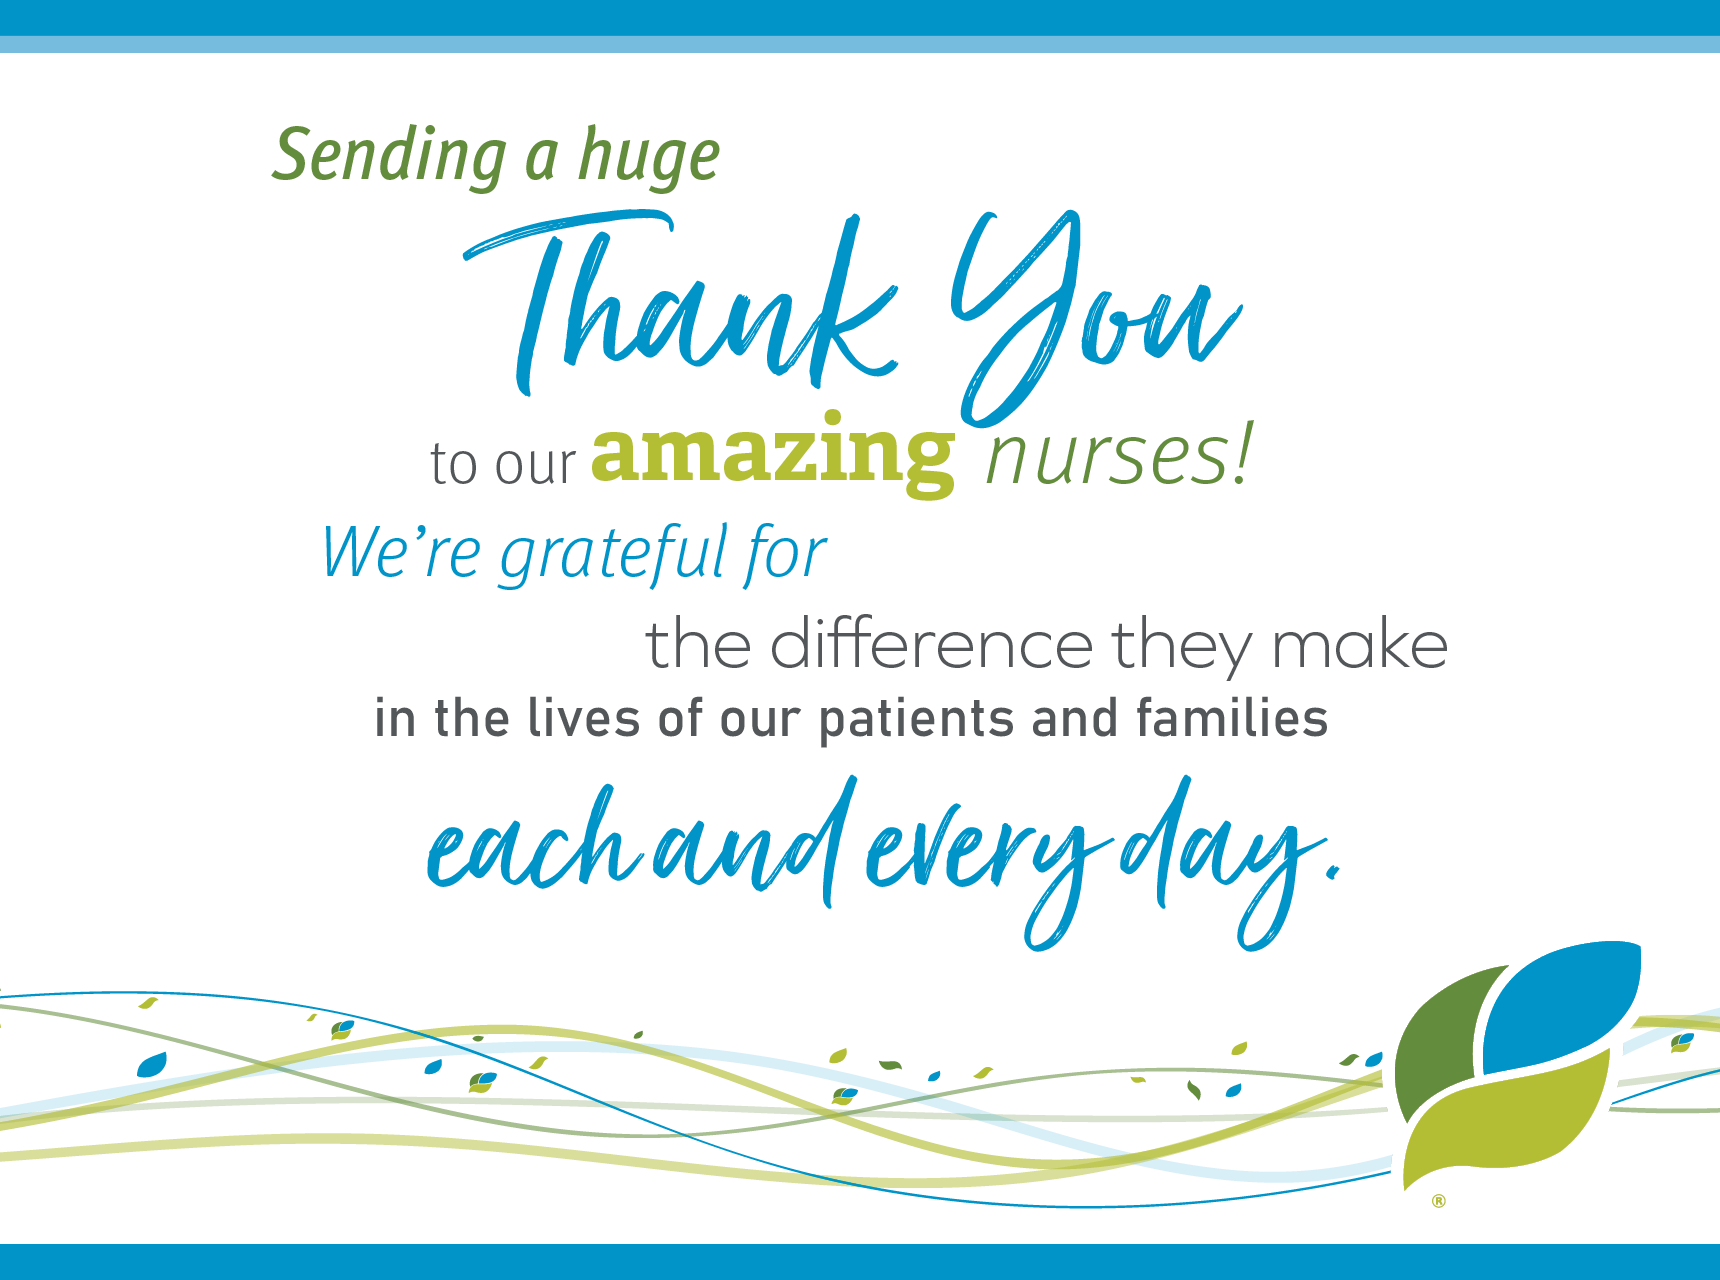 Sending a huge Thank You to our amazing nurses! We're grateful for the difference they make in the lives of our patients and families each and every day. Ohio's Hospice.